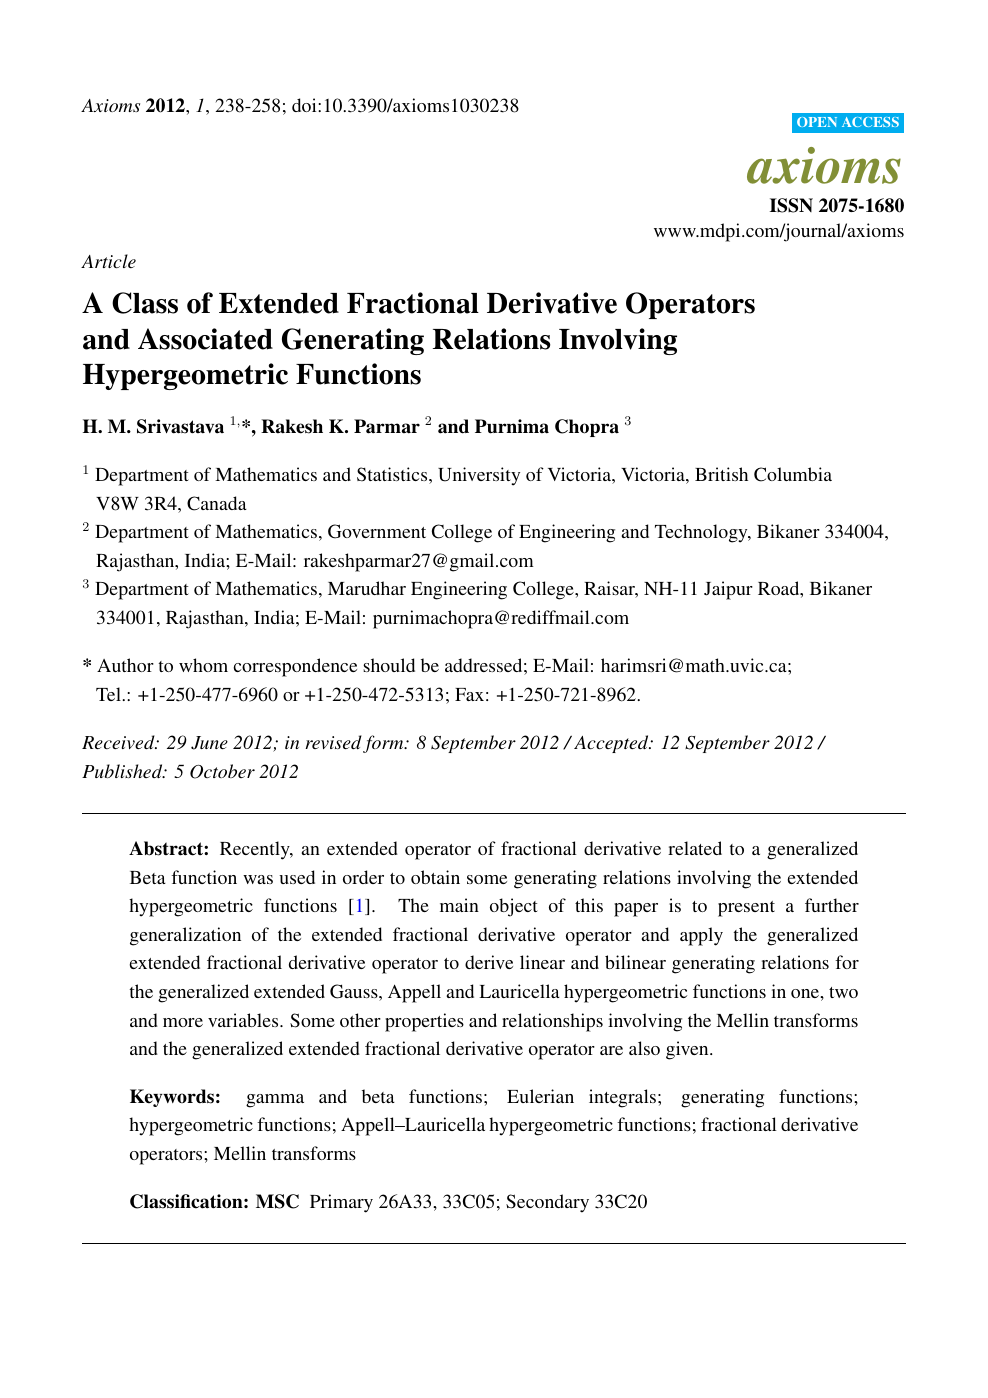 A Class Of Extended Fractional Derivative Operators And Associated Generating Relations Involving Hypergeometric Functions Topic Of Research Paper In Mathematics Download Scholarly Article Pdf And Read For Free On Cyberleninka Open